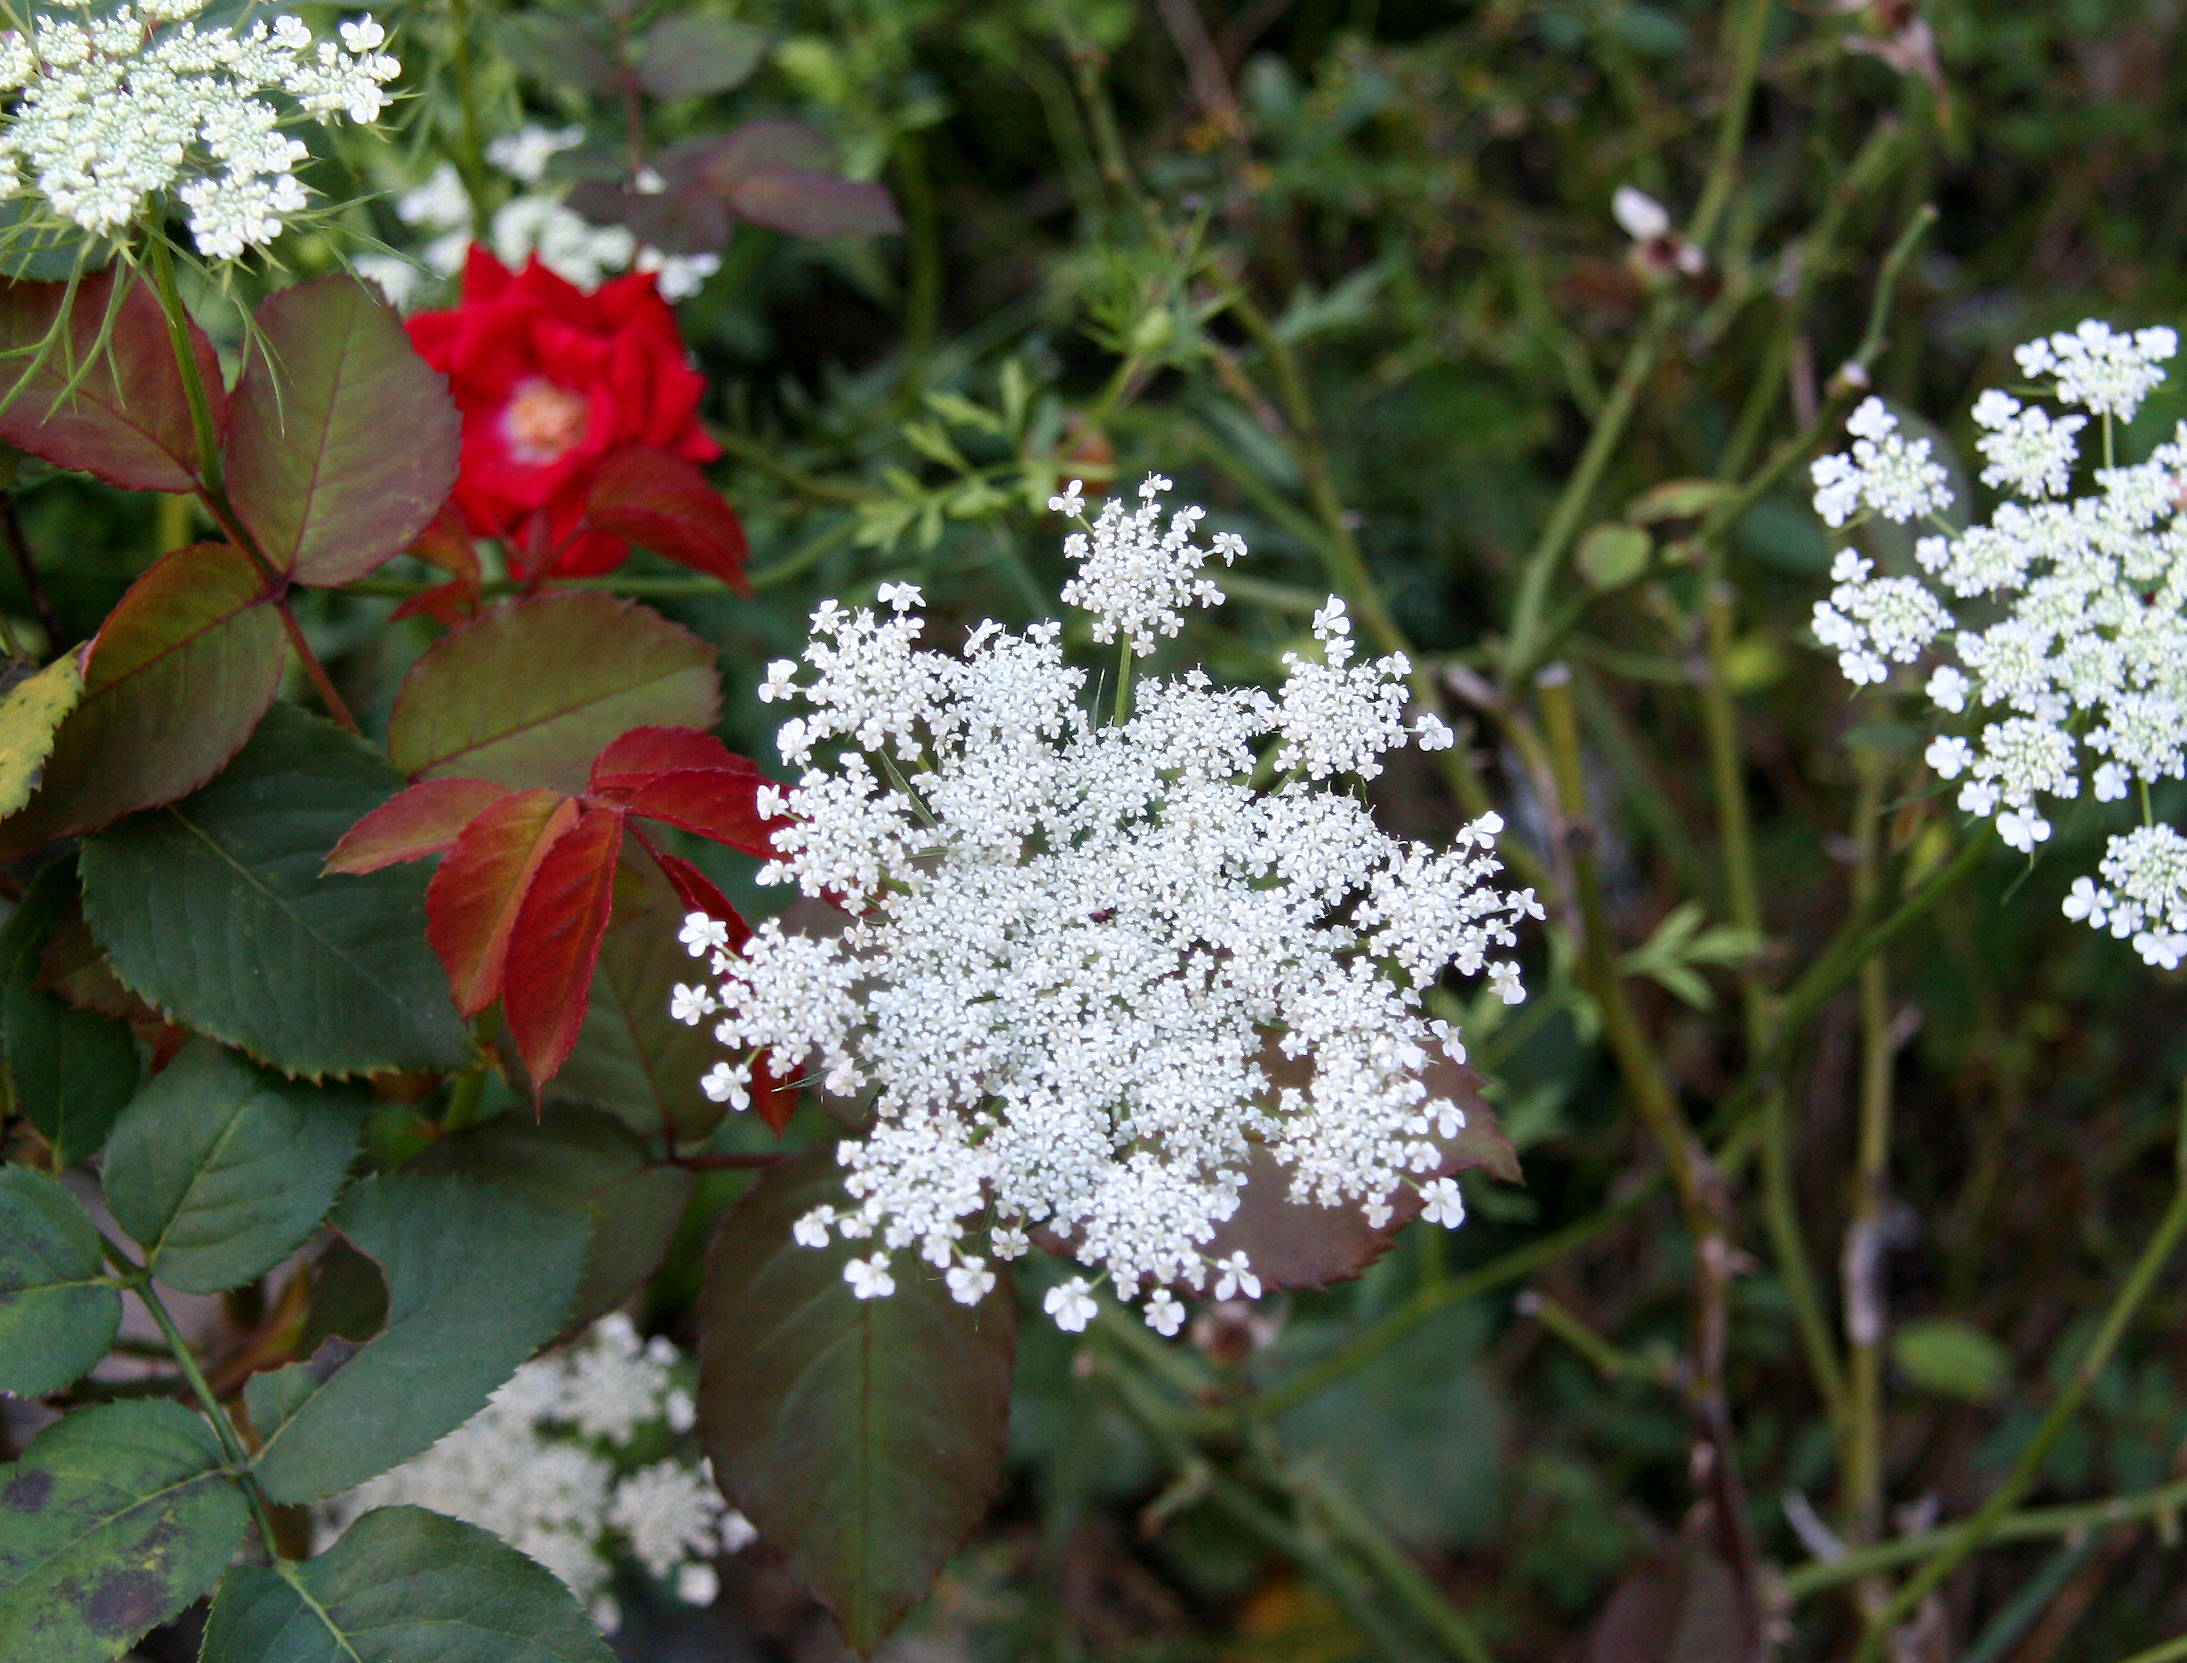 Queen Ann Lace and a Red Rose Bush